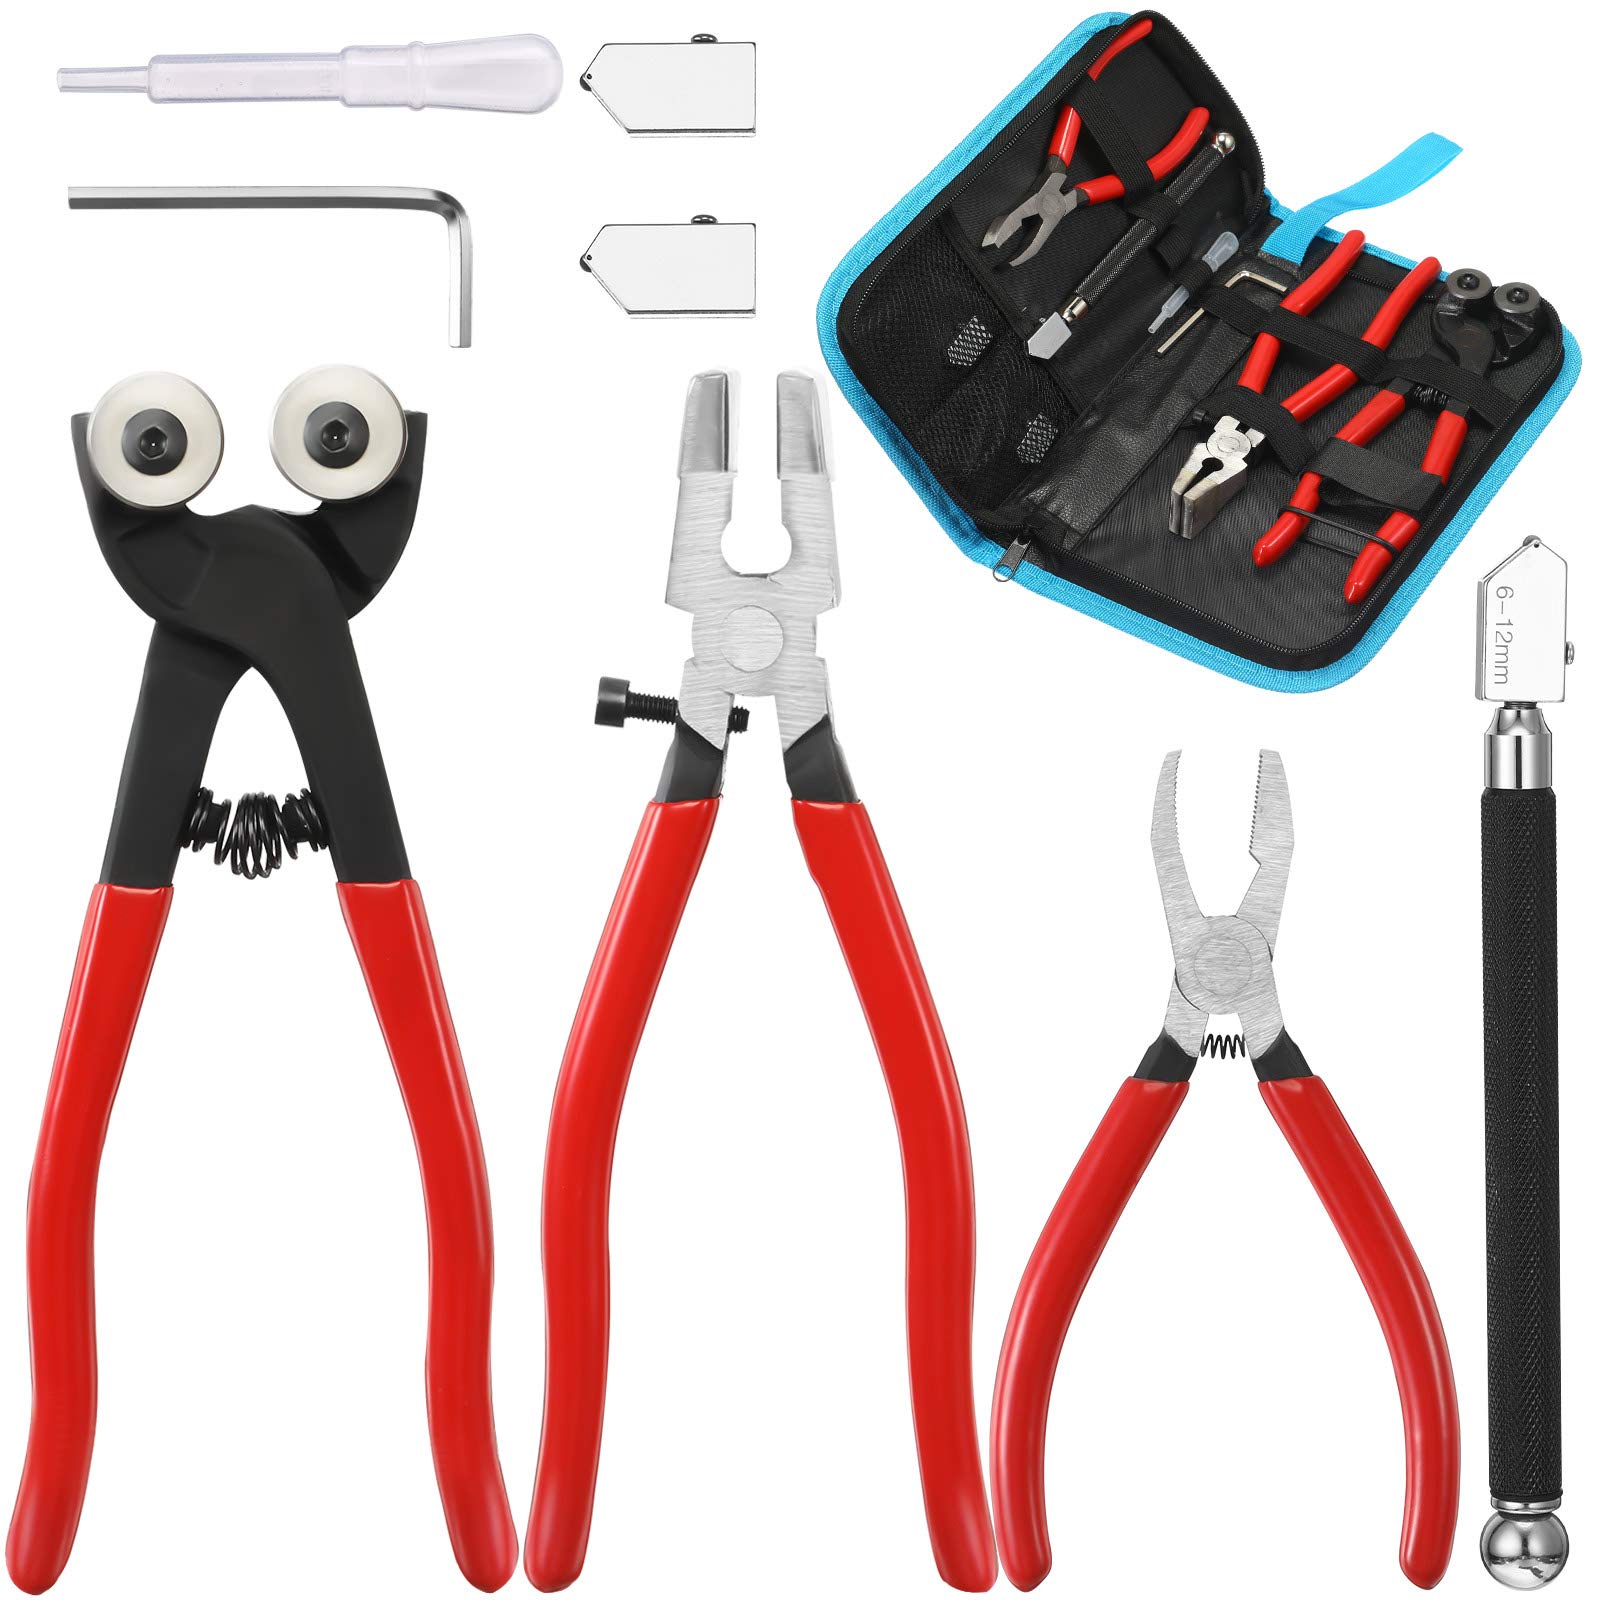 Manual Plier Cutting Glass Tile Ceramic Cutter Tool Pliers Made in Great  Britain